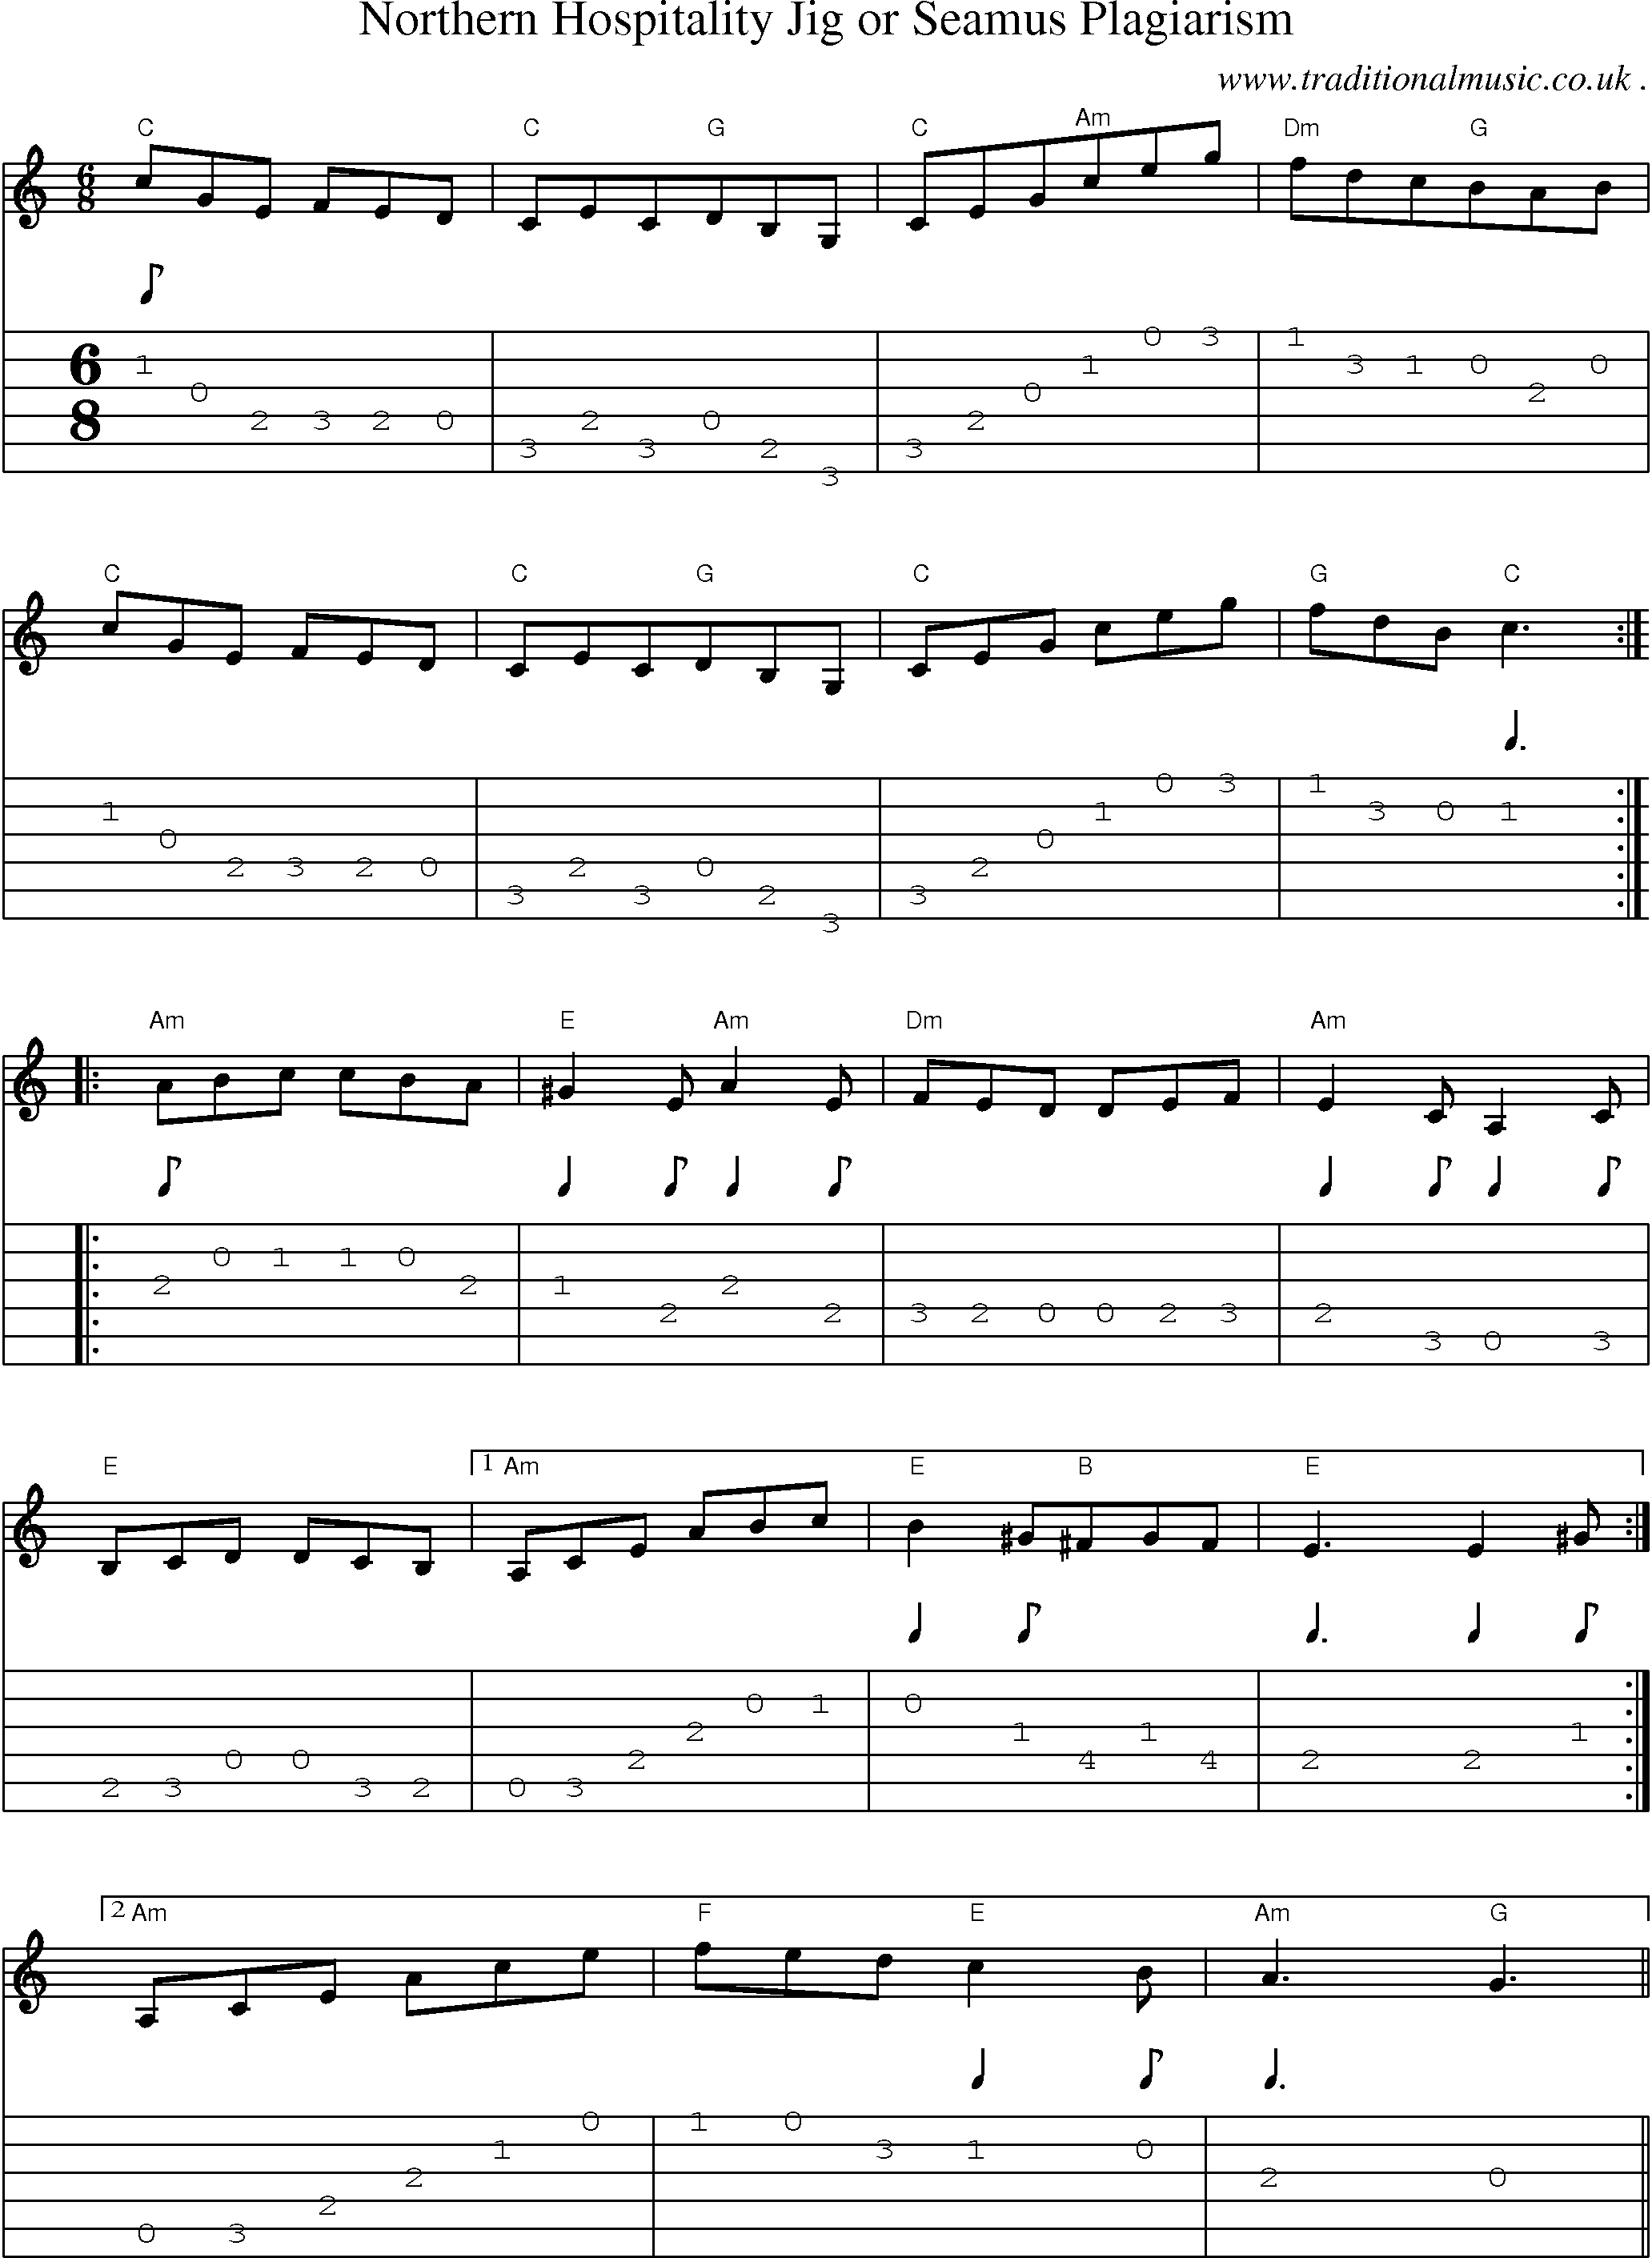 Sheet-Music and Guitar Tabs for Northern Hospitality Jig Or Seamus Plagiarism